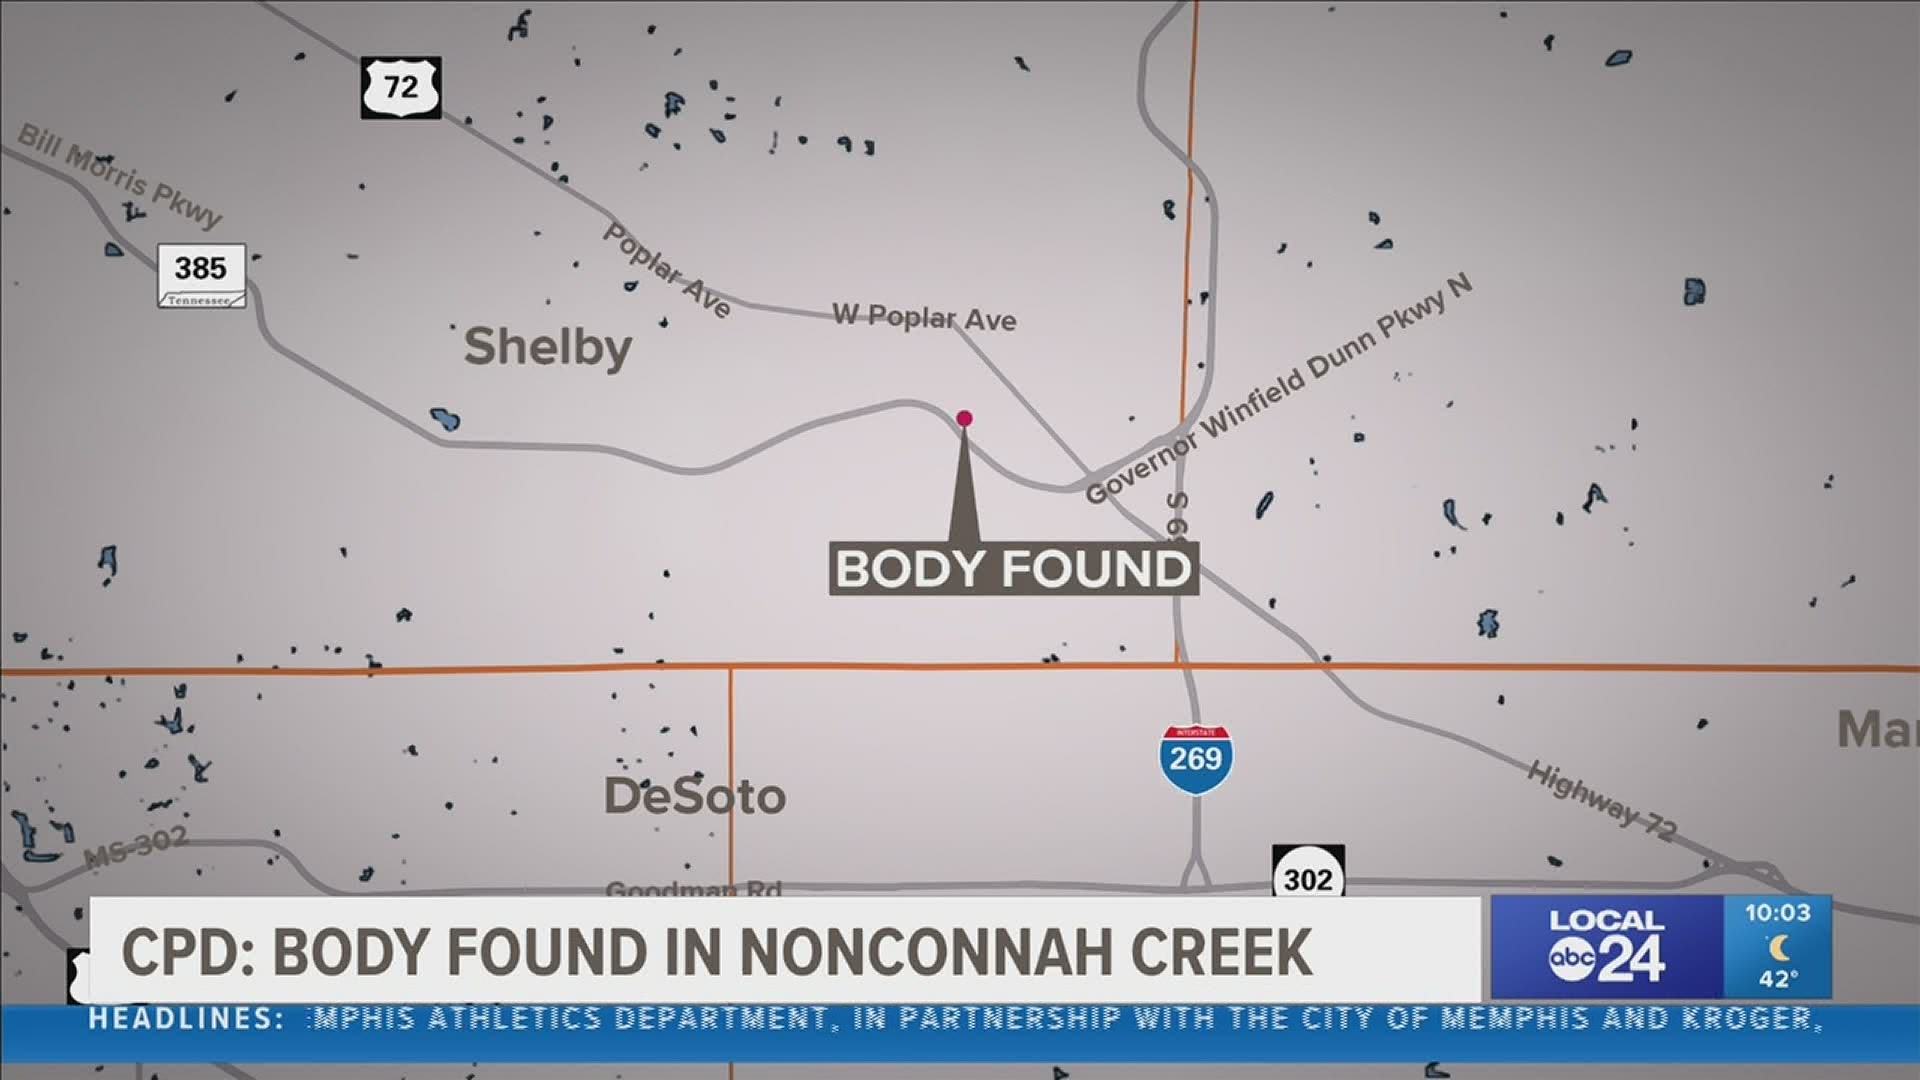 Body found in Nonconnah Creek south of HWY 385